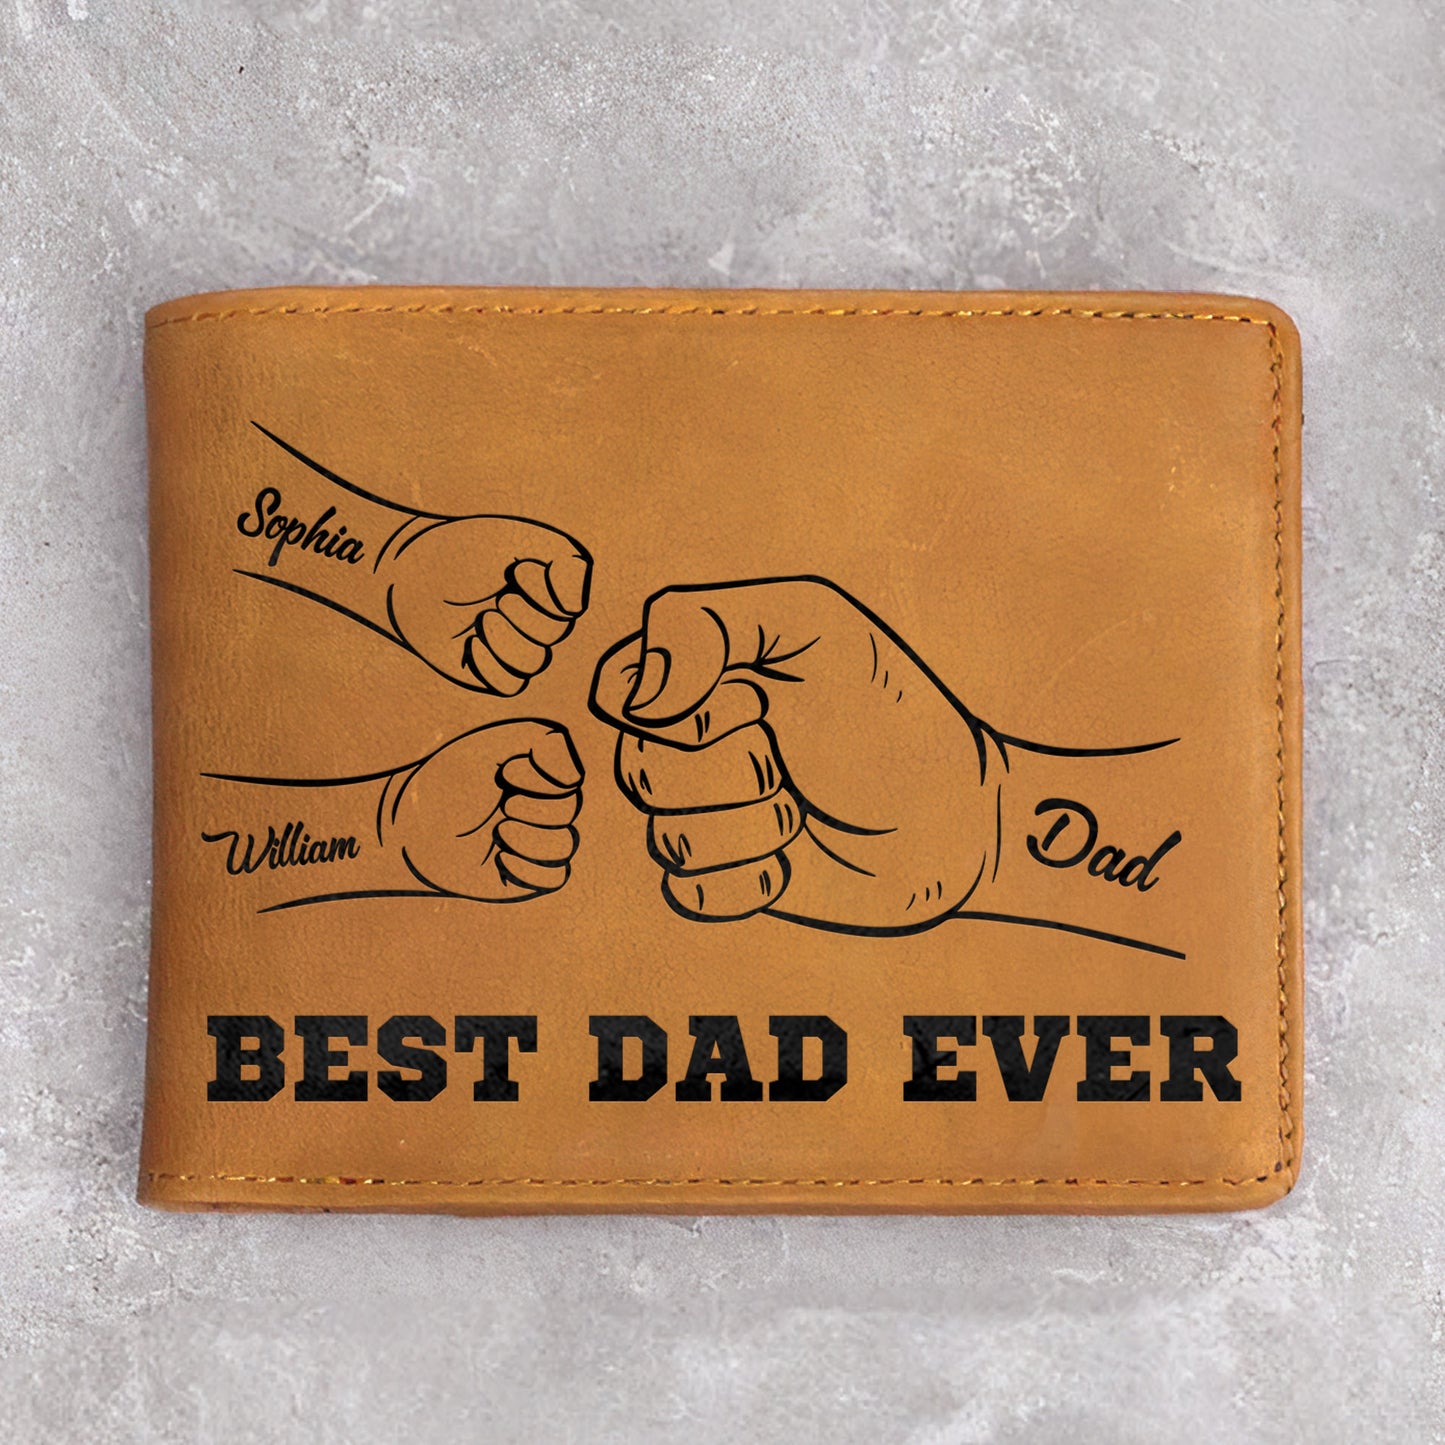 Best Dad Ever Father's Day Gift Custom Kids' Names - Personalized Leather Wallet